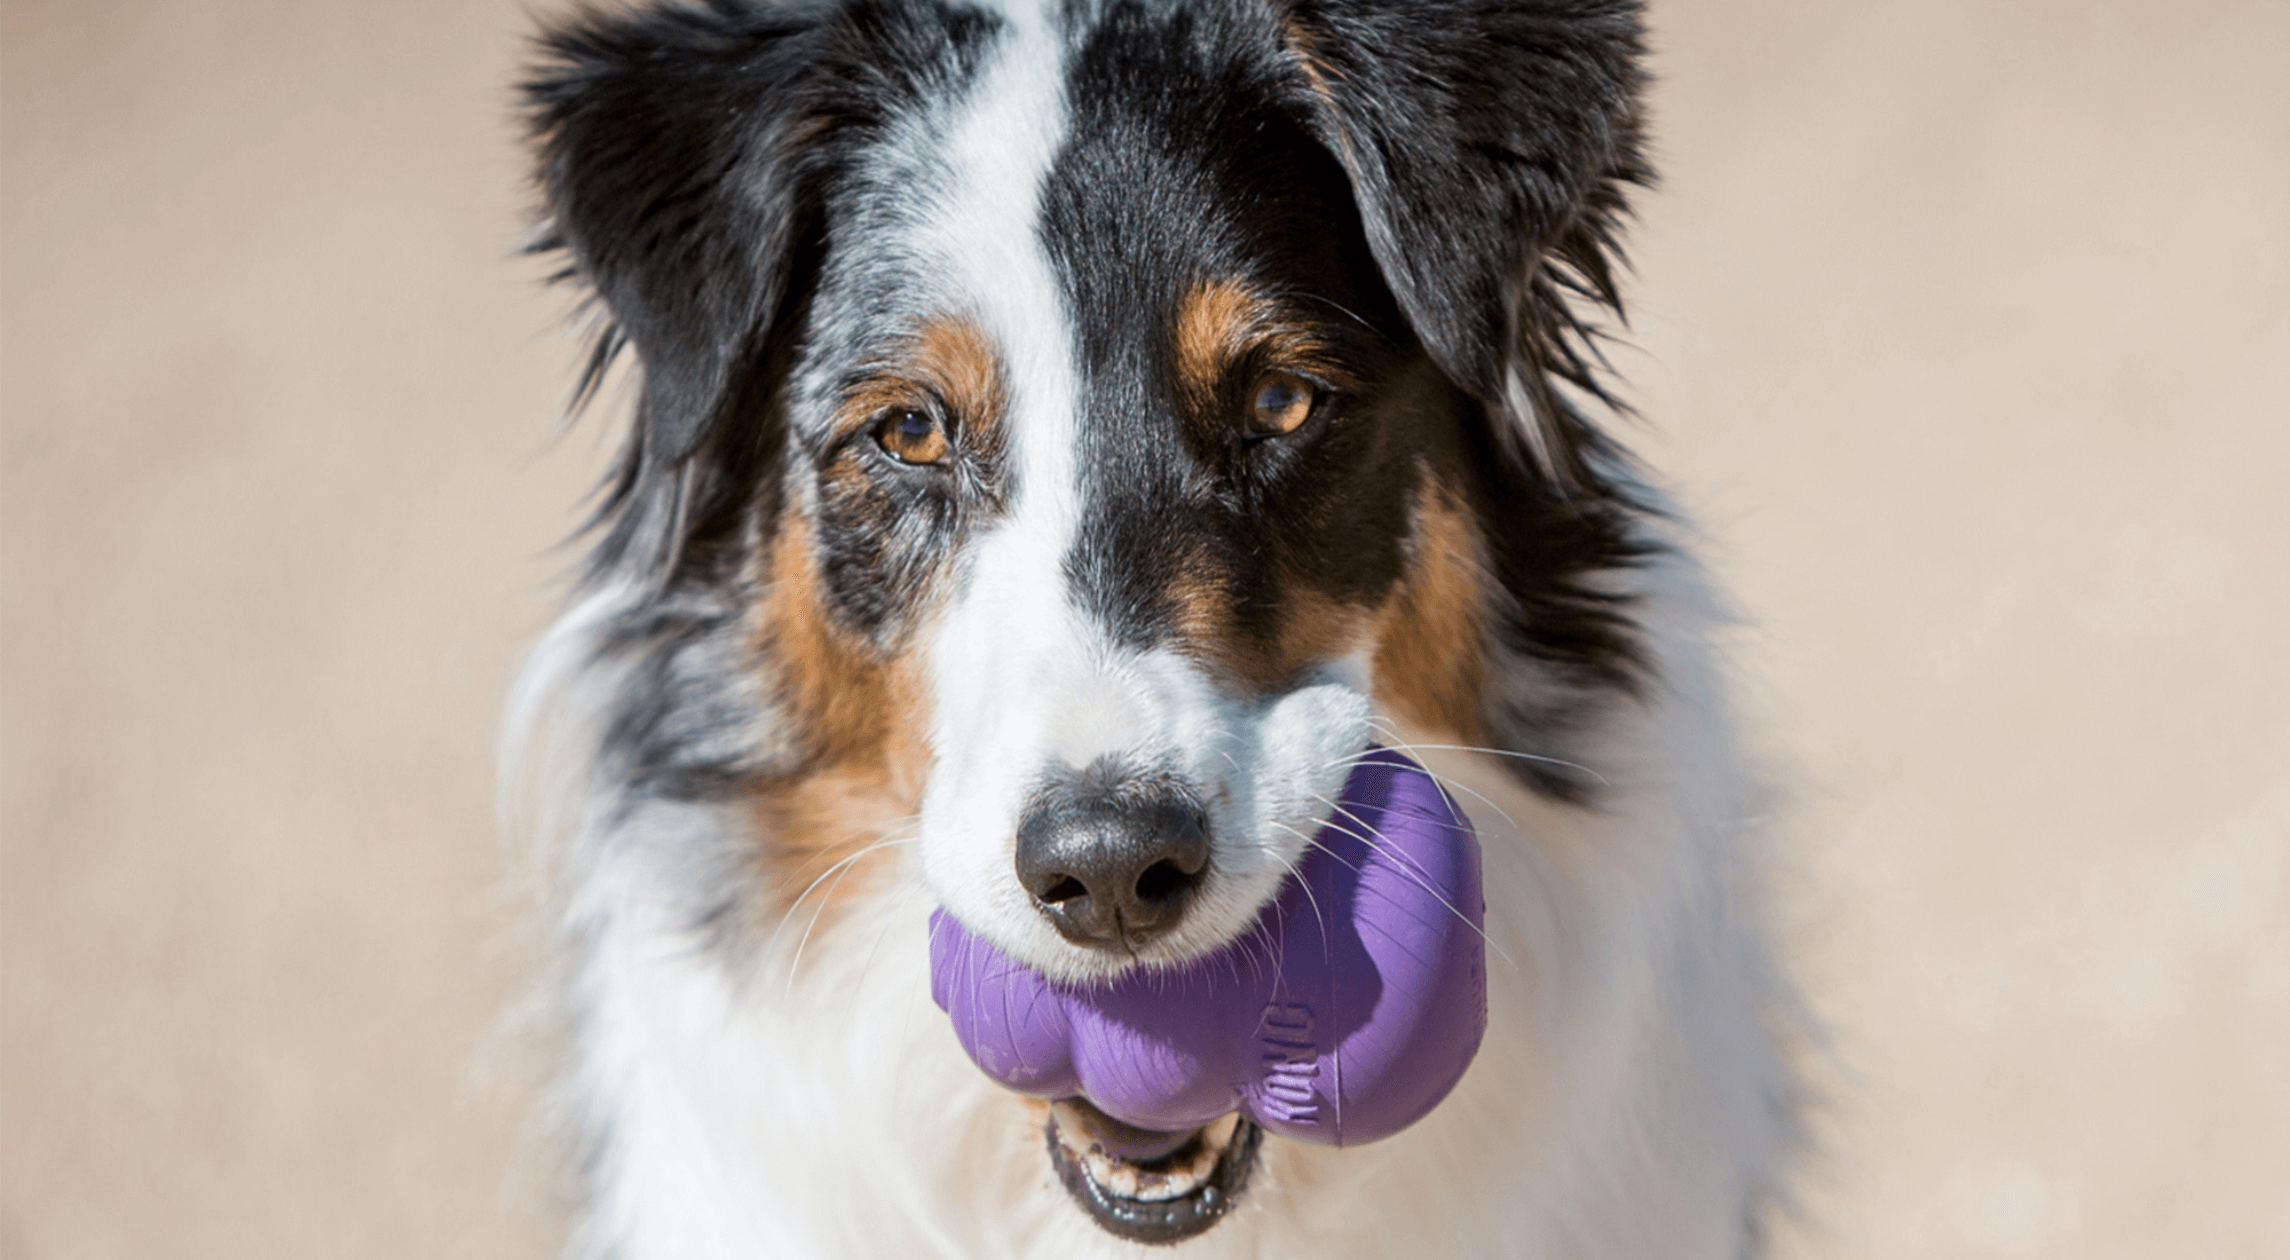 The best dog toys for fetch, chewing and mental stimulation – Let's Pawty